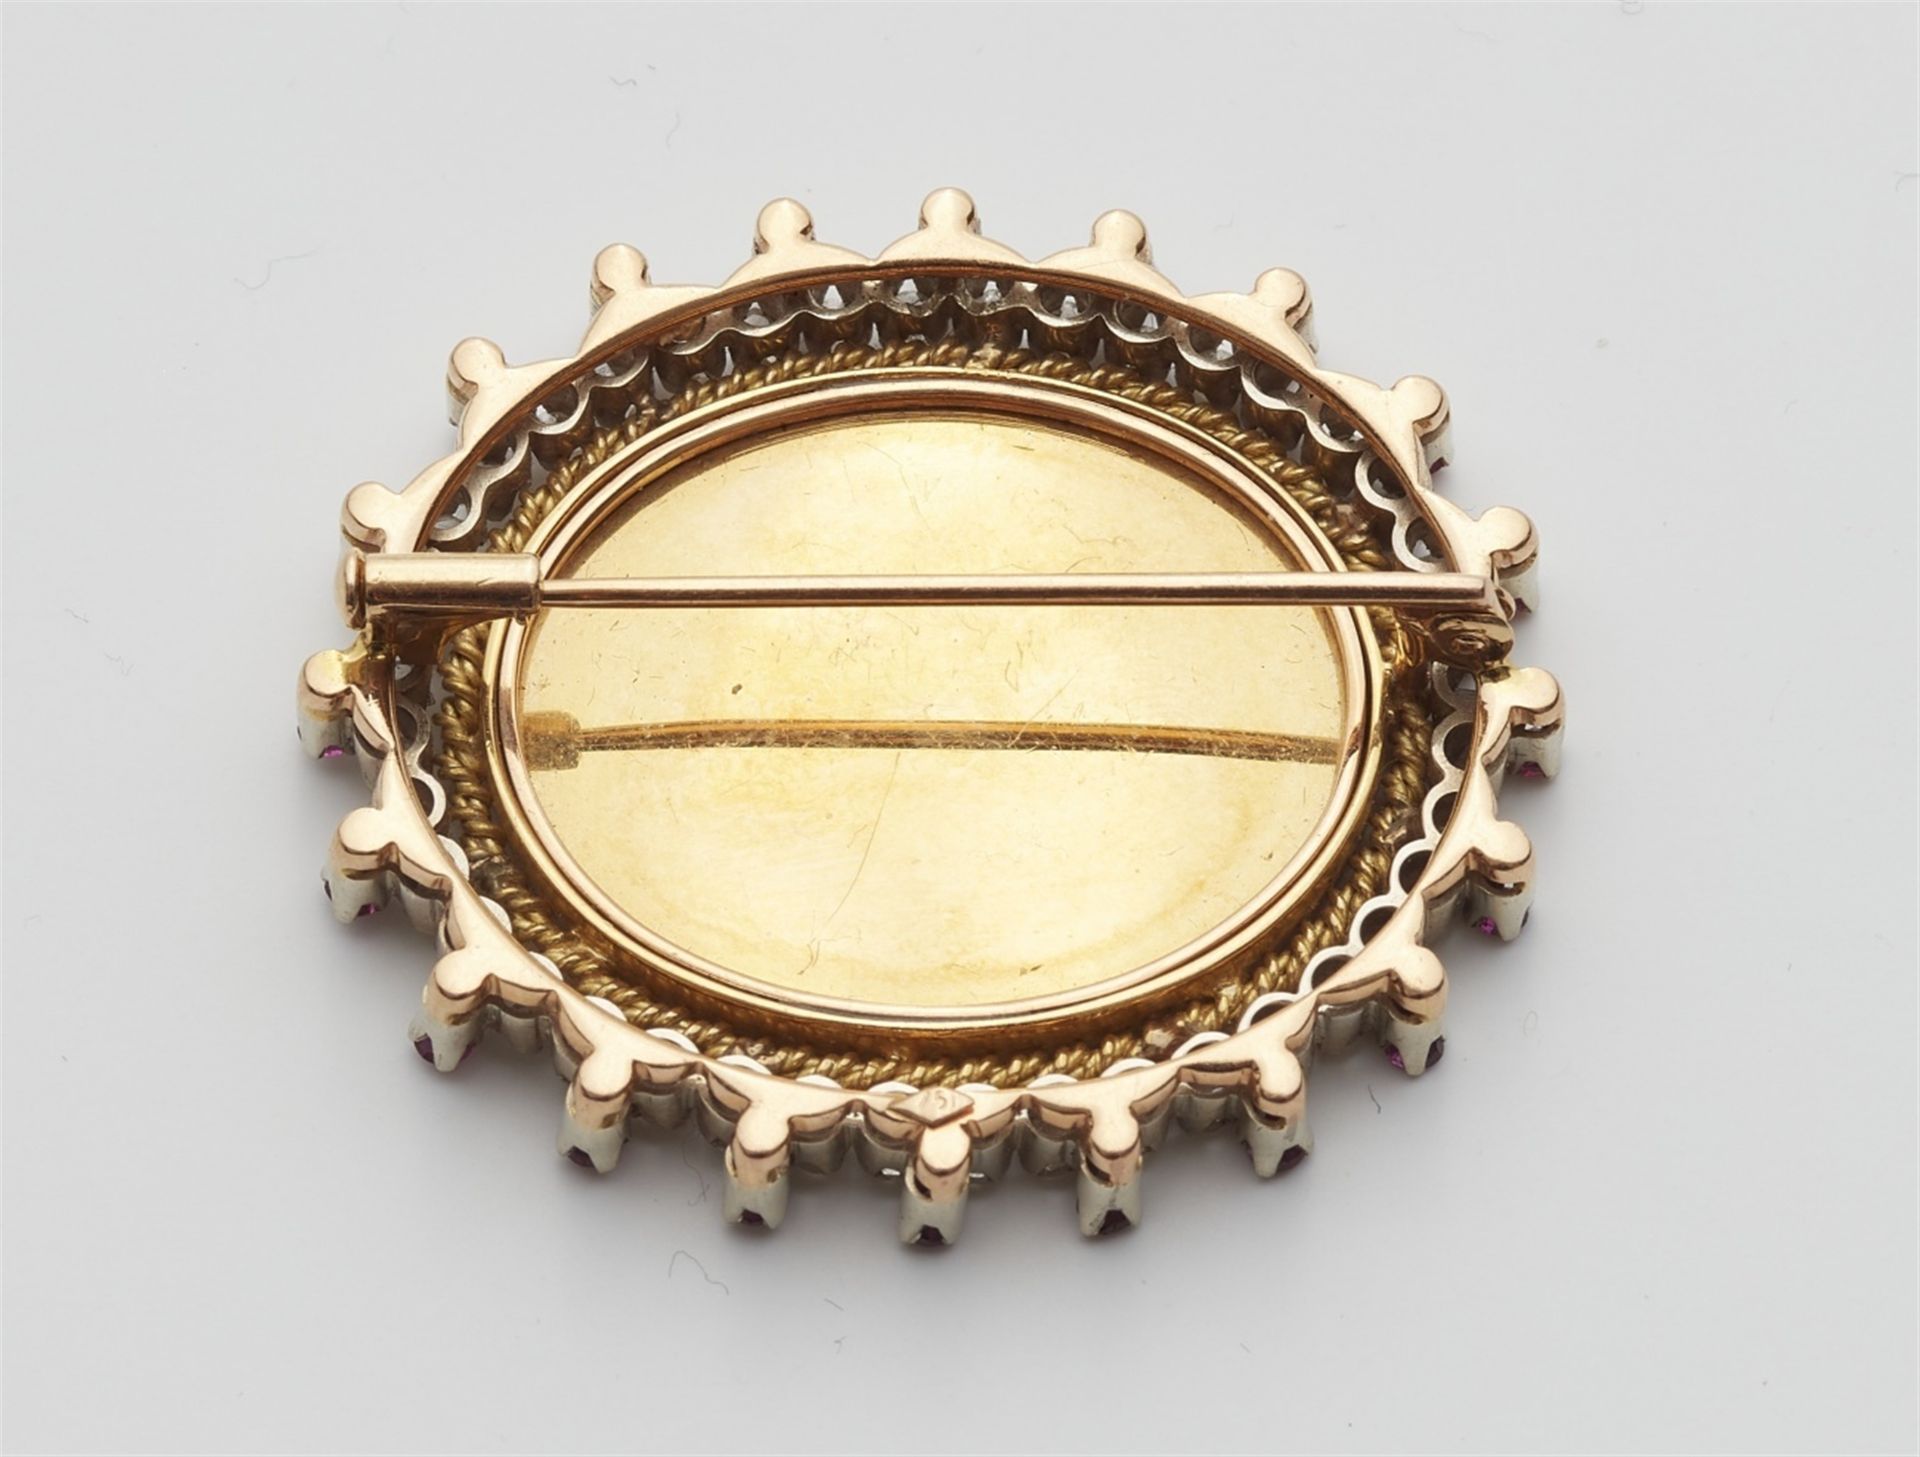 An 18k gold brooch with an enamel miniature - Image 2 of 2